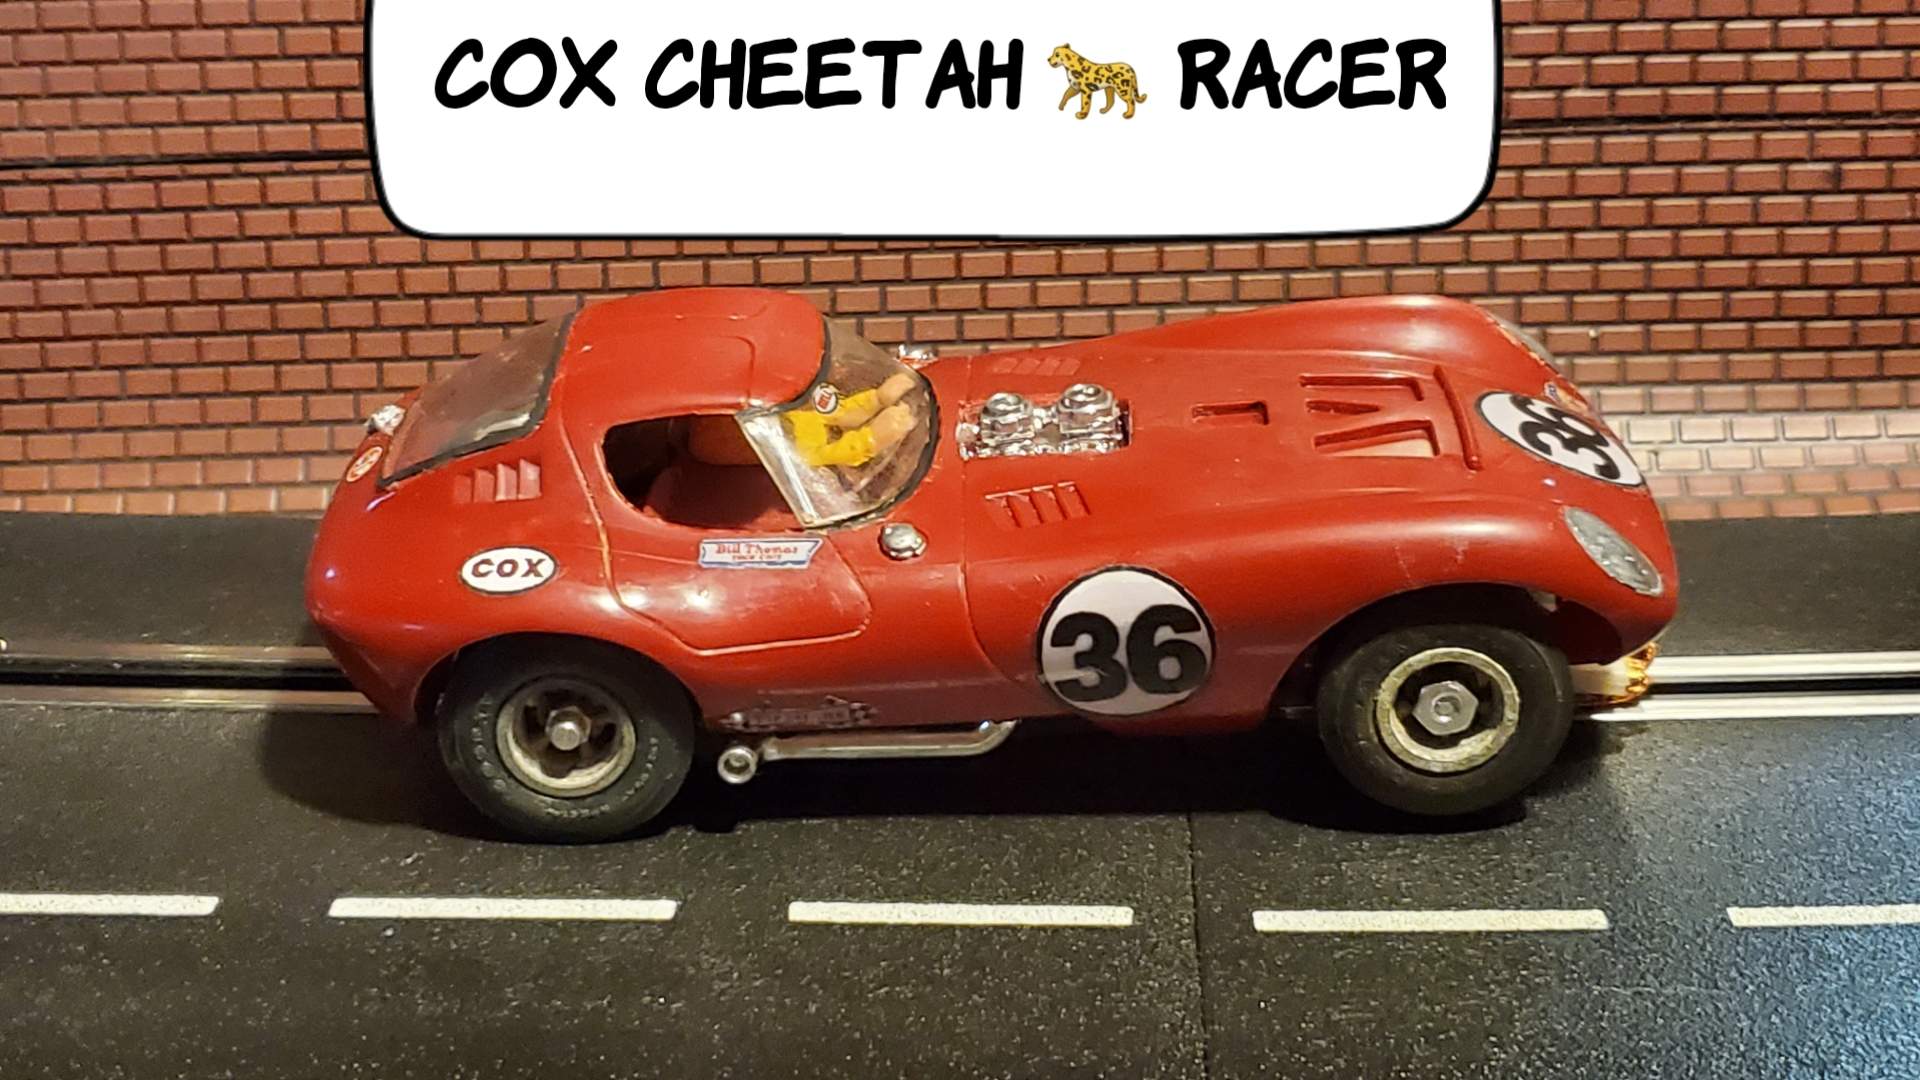 * Black Friday Super Sale, Save $30.00 vs. our $325.00 Ebay Store Price * COX Cheetah Racer Slot Car 1/24 Scale Car 36 Bill Thomas Racing